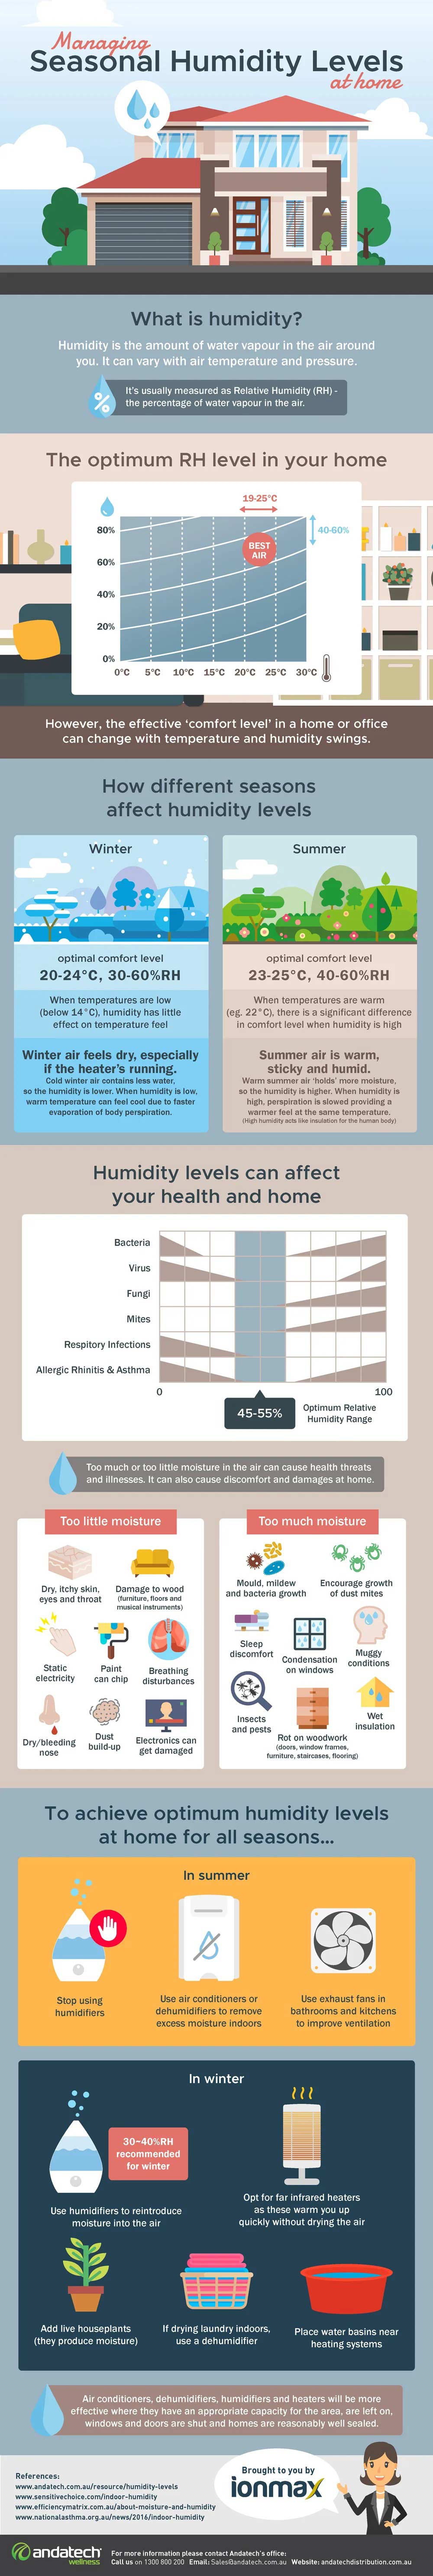 Check out our infographic below on how best to manage seasonal humidity levels at home